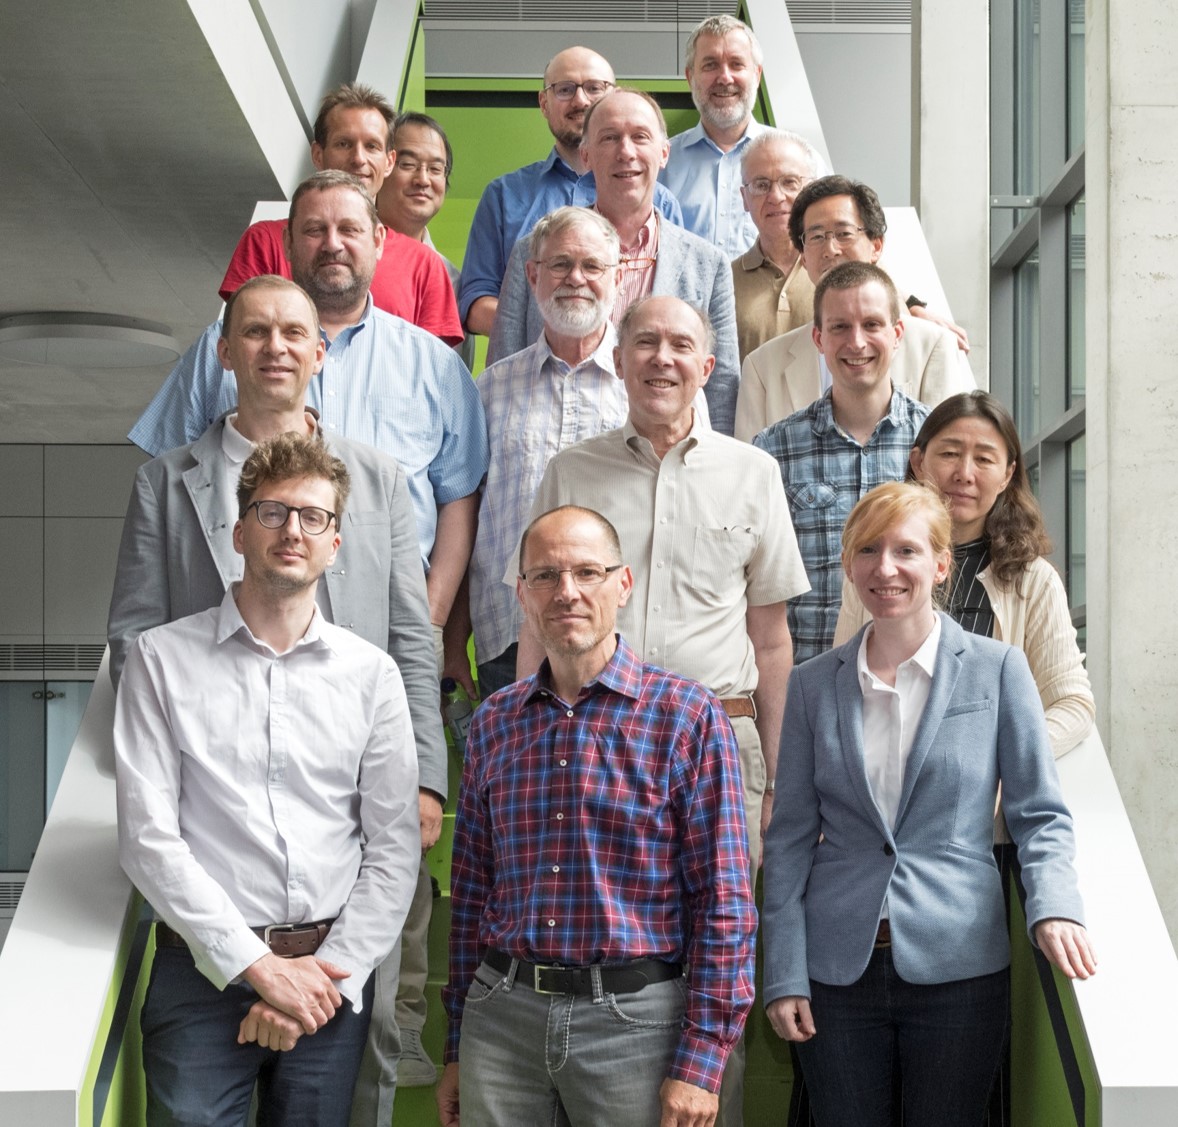 Members of the Atomic Weights Commission at the 2019 biennial meeting in Germany